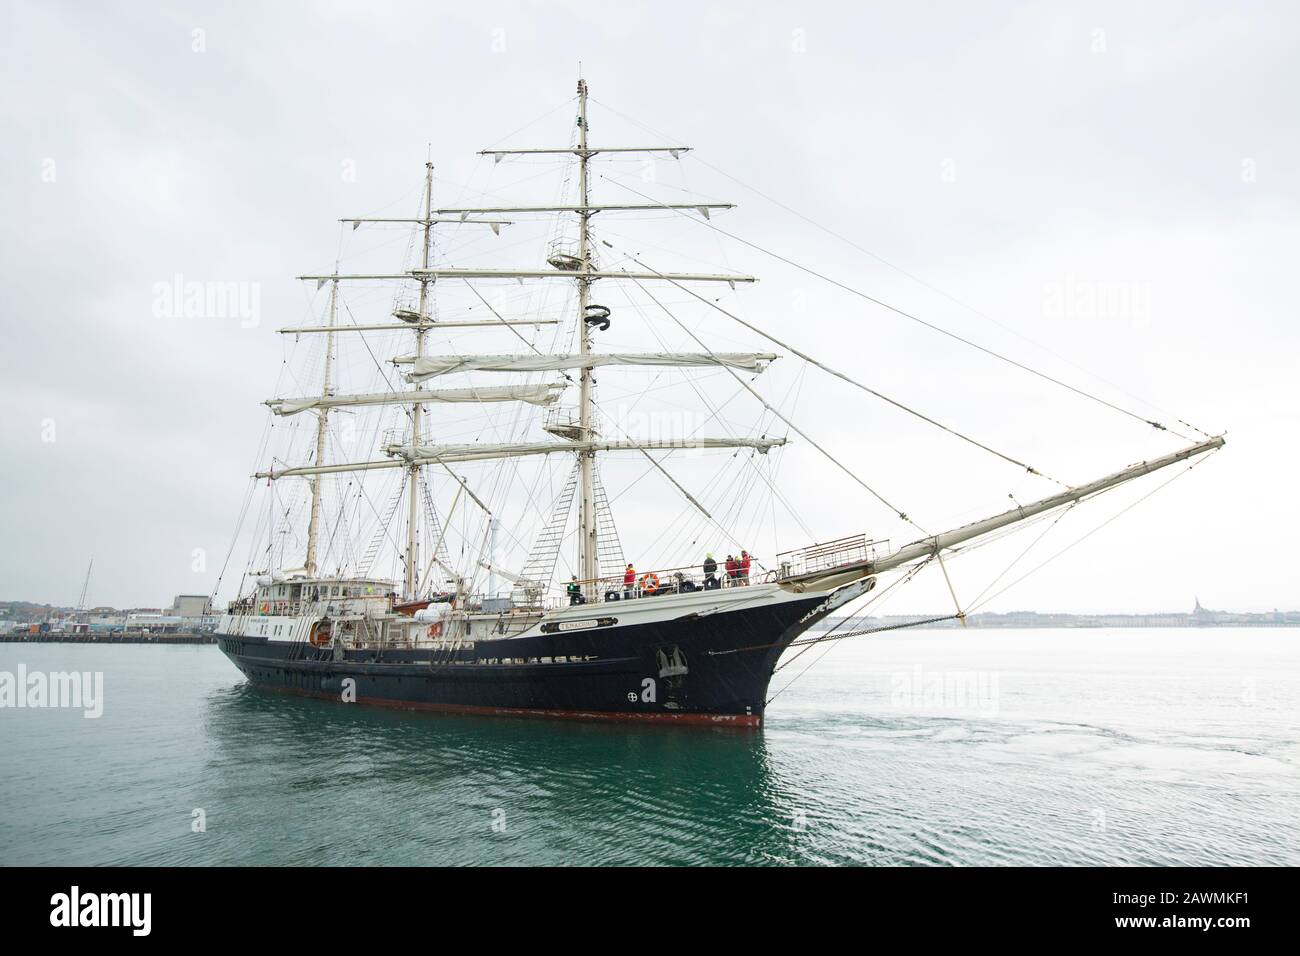 The Tall Ship Tenacious approaching Weymouth harbour in Dorset. The Tenacious was completed in 2000 and is designed for both able-bodied and disabled Stock Photo